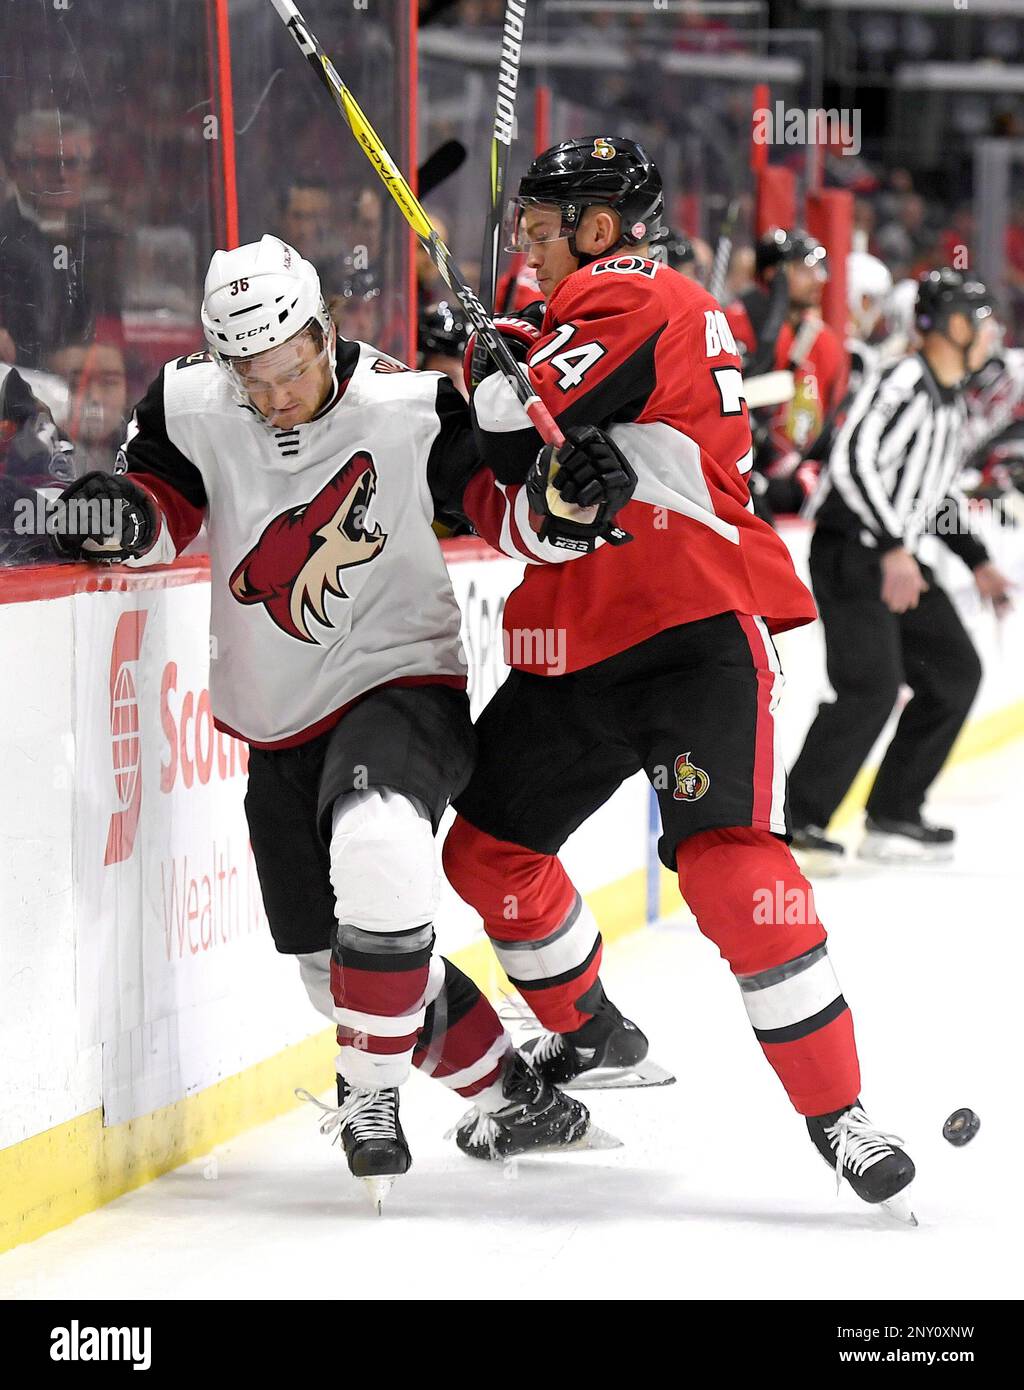 Senators' Alex Burrows suspended 10 games for kneeing Taylor Hall 